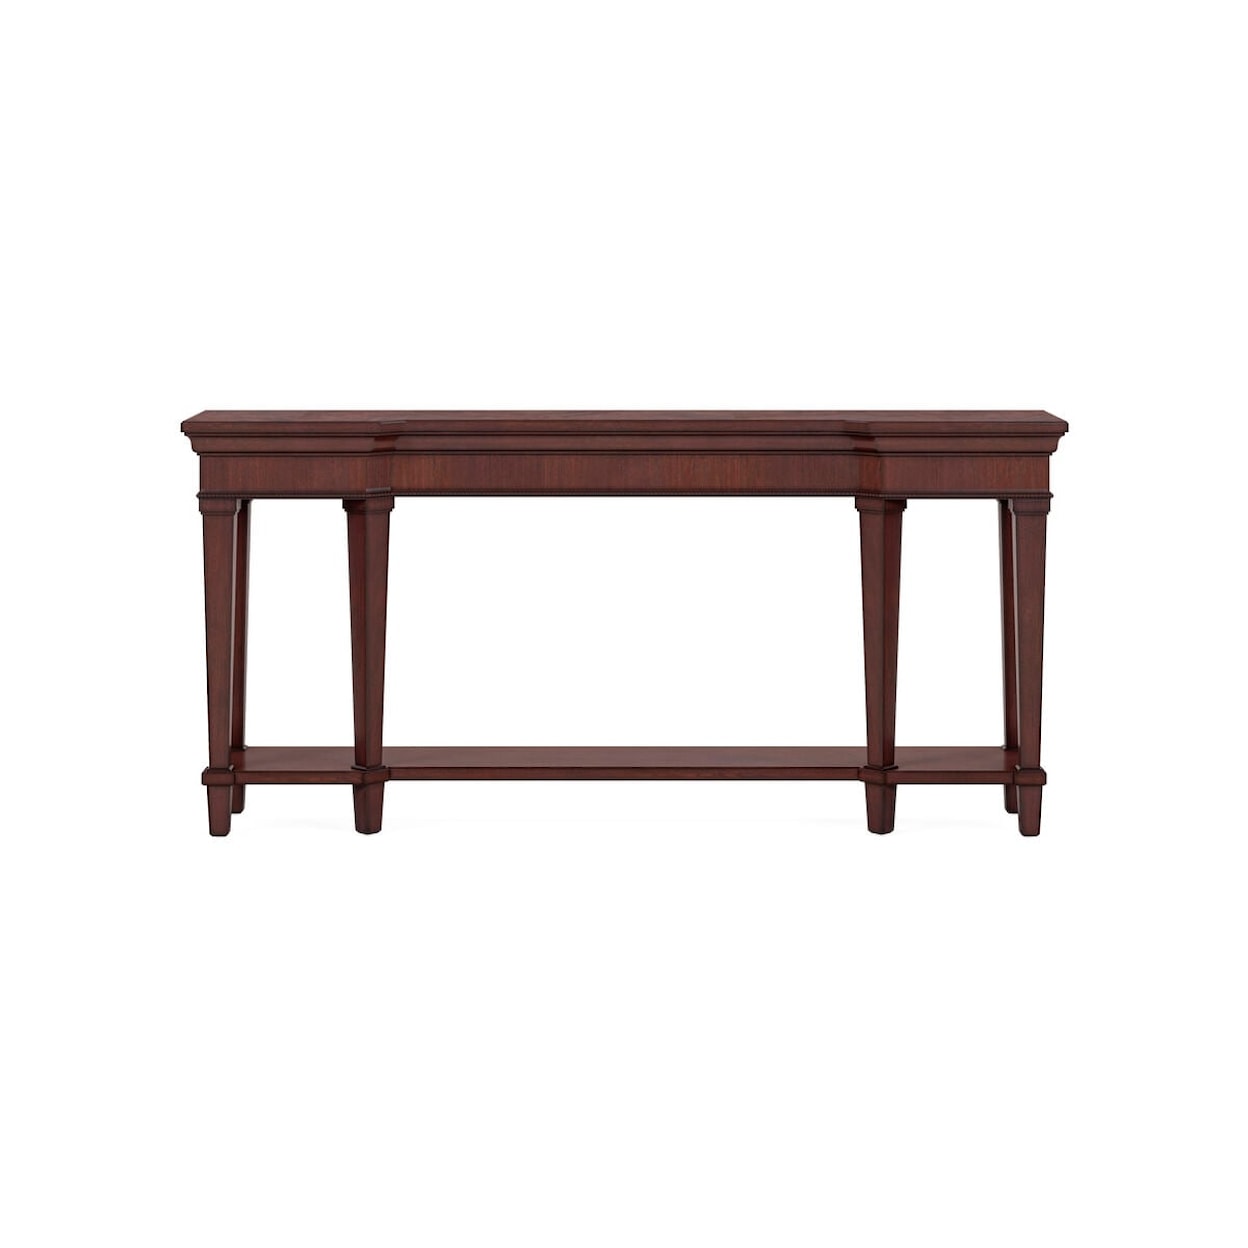 A.R.T. Furniture Inc 328 - Revival Console Table